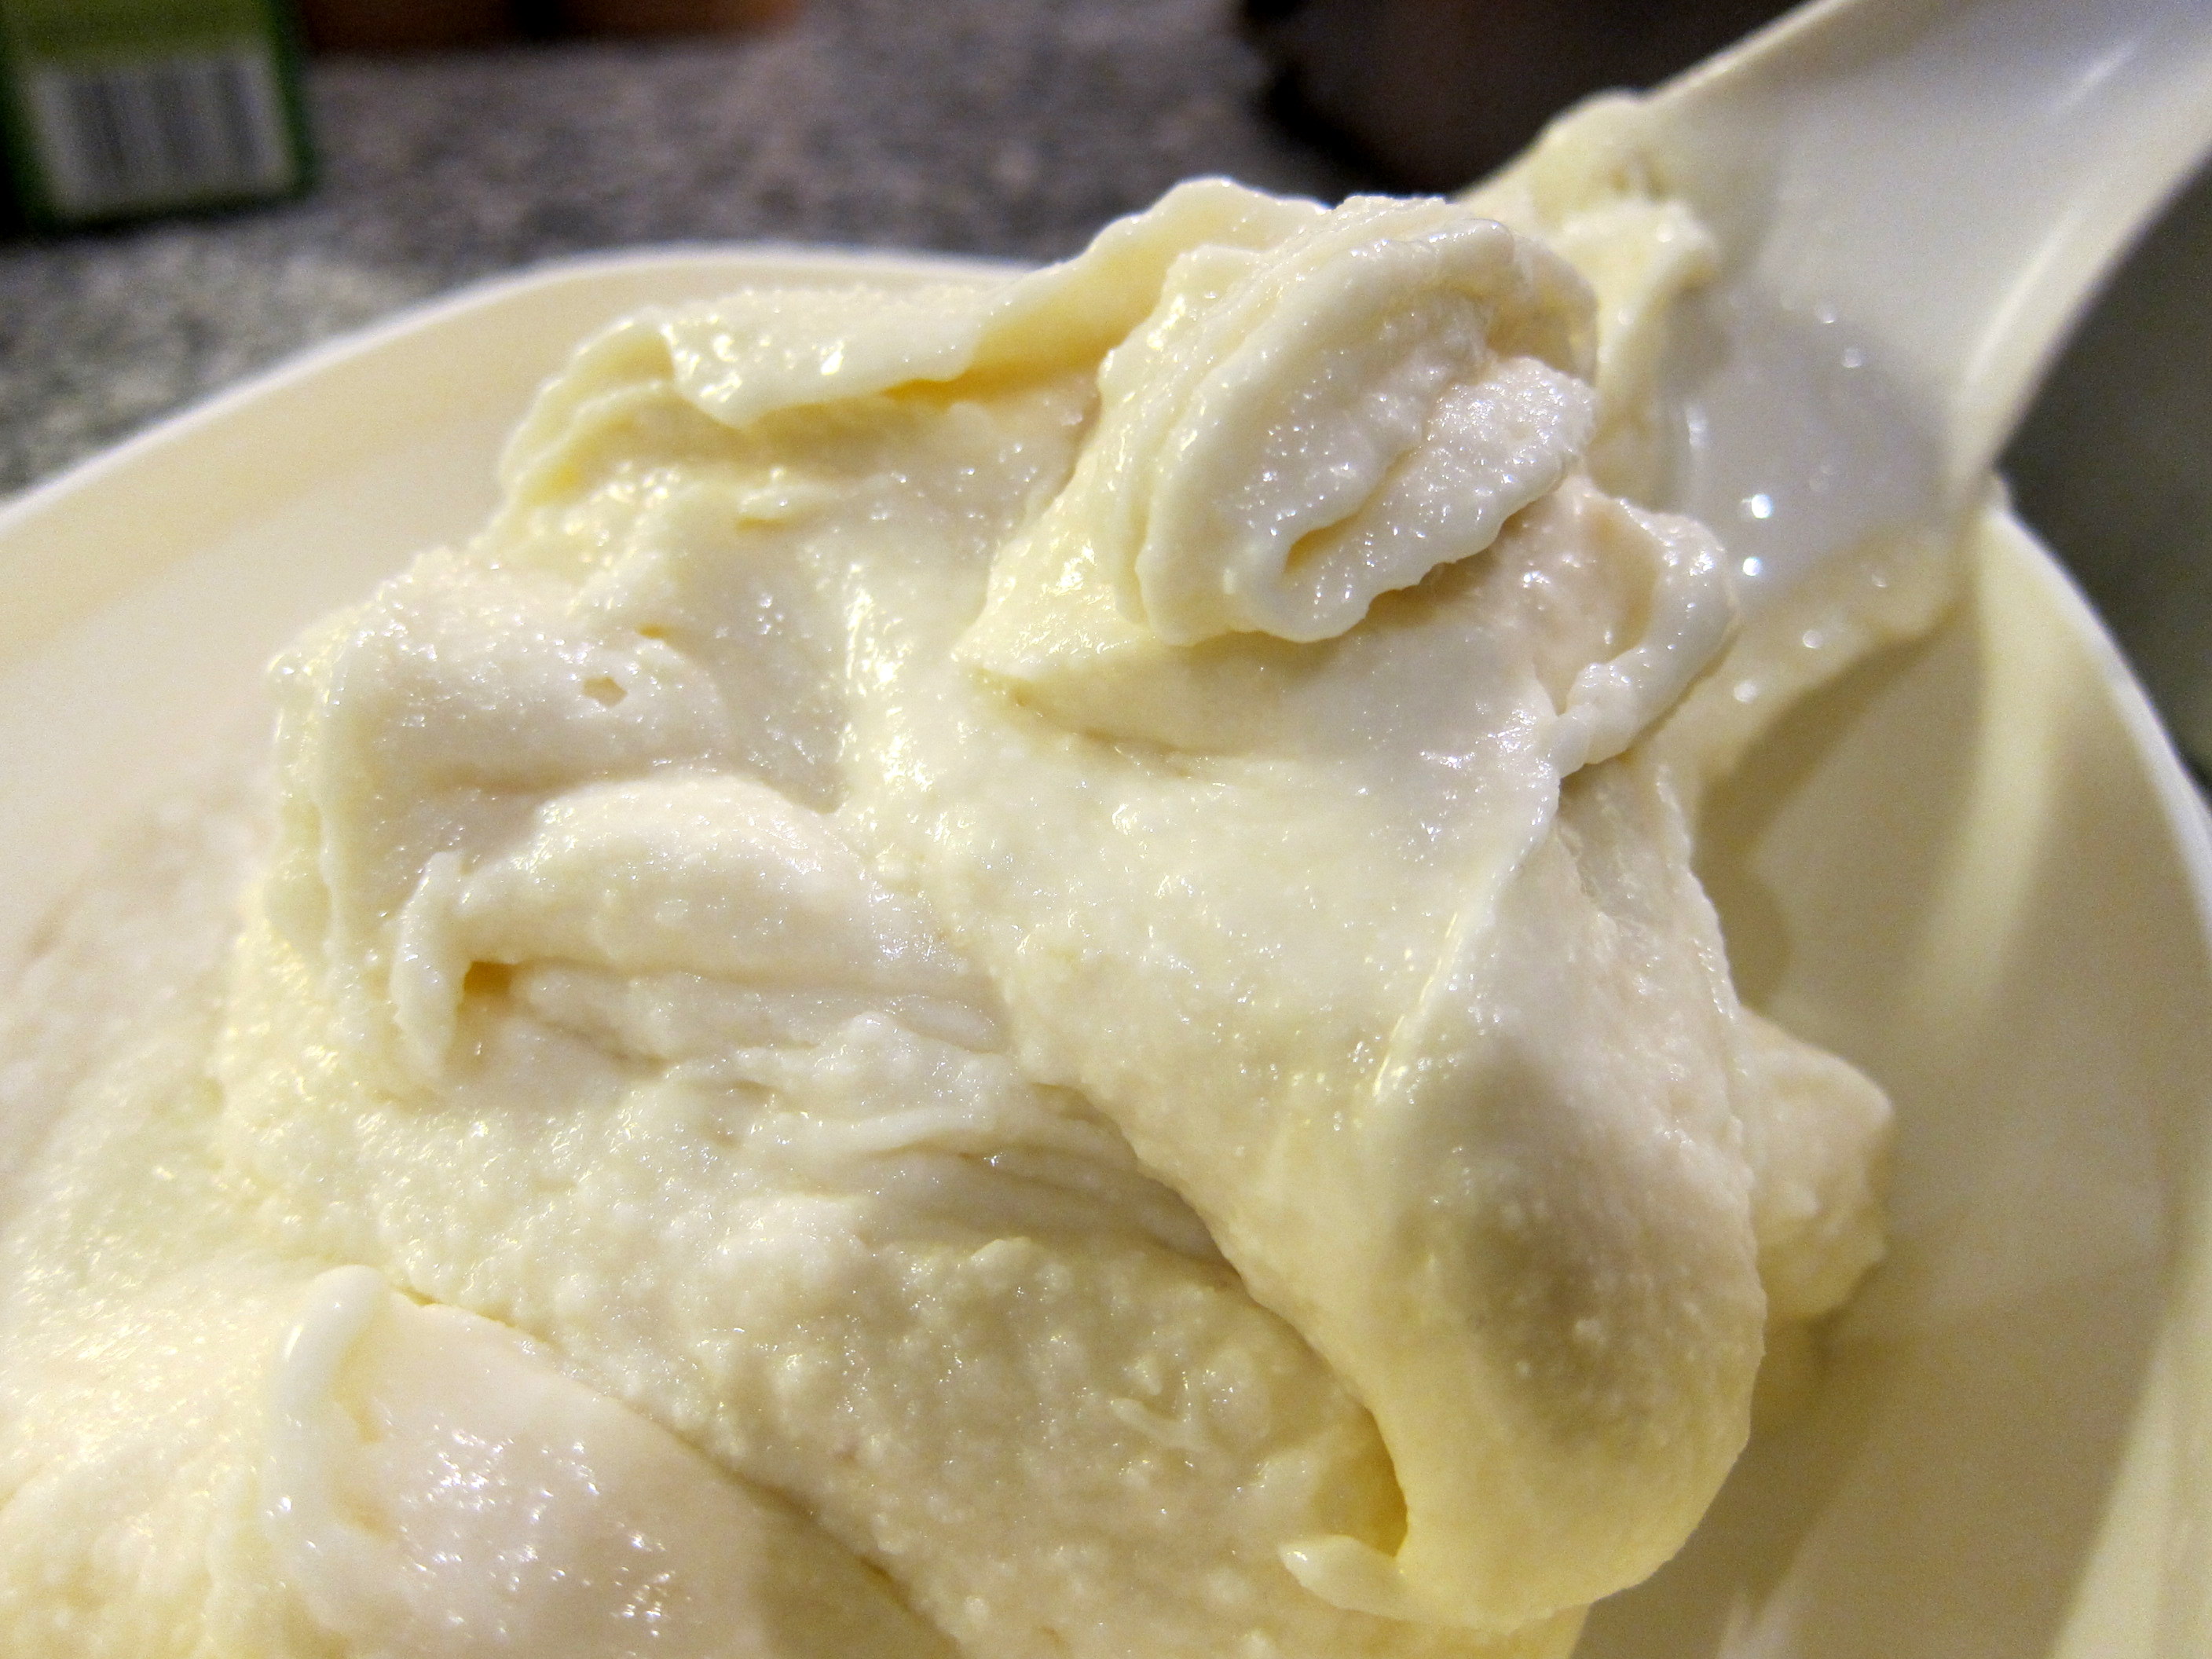 Marzipan ice cream - straight from the churning